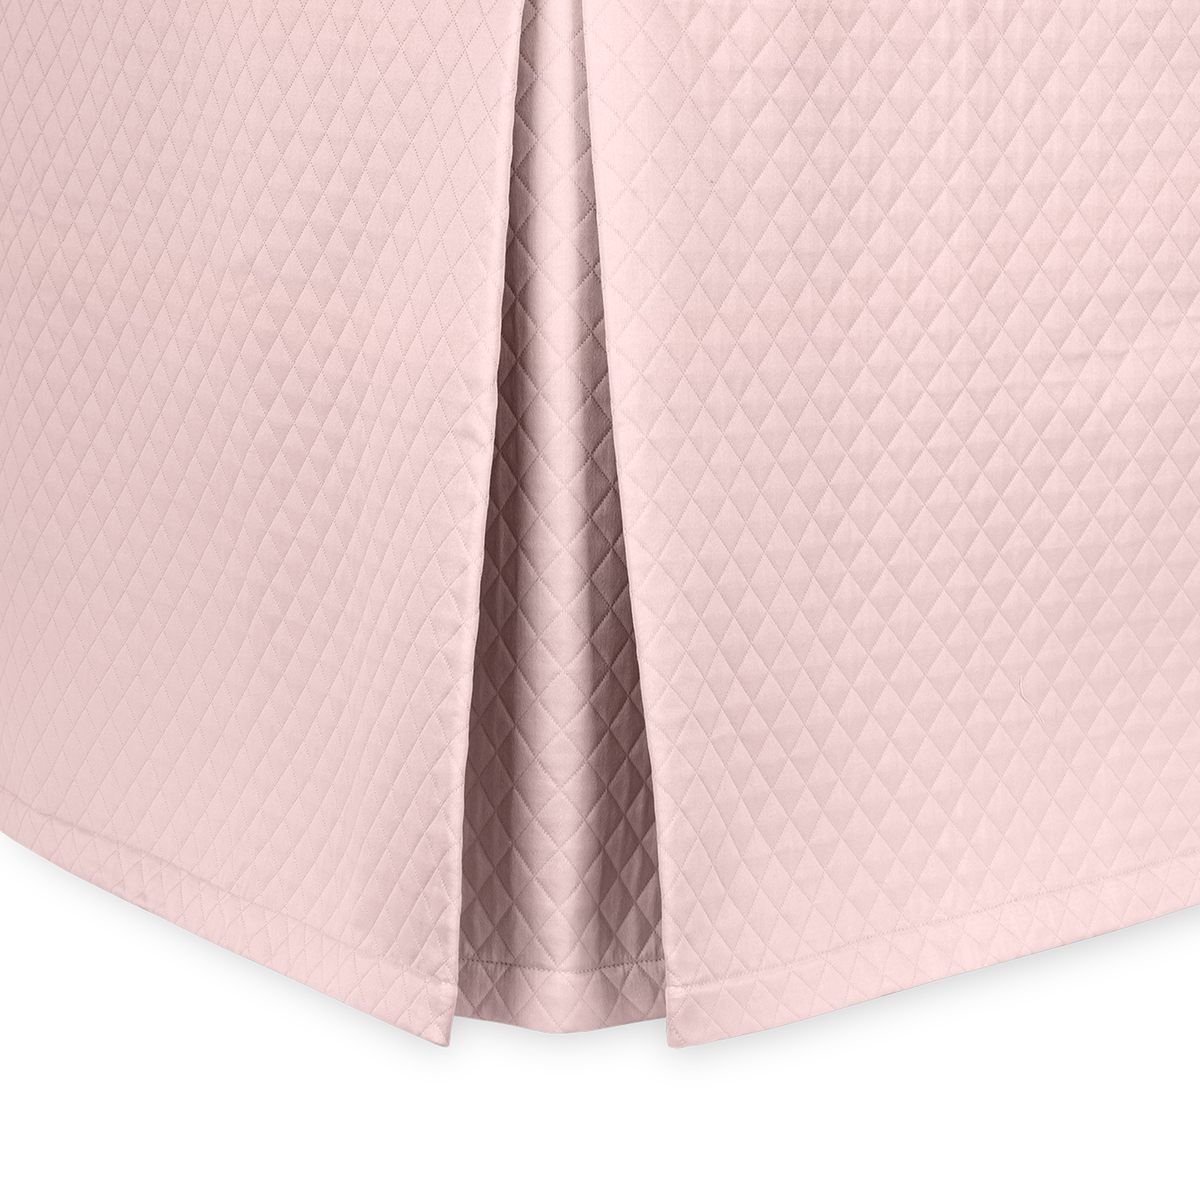 Silo Image of Matouk Petra Bed Skirt in Color Pink